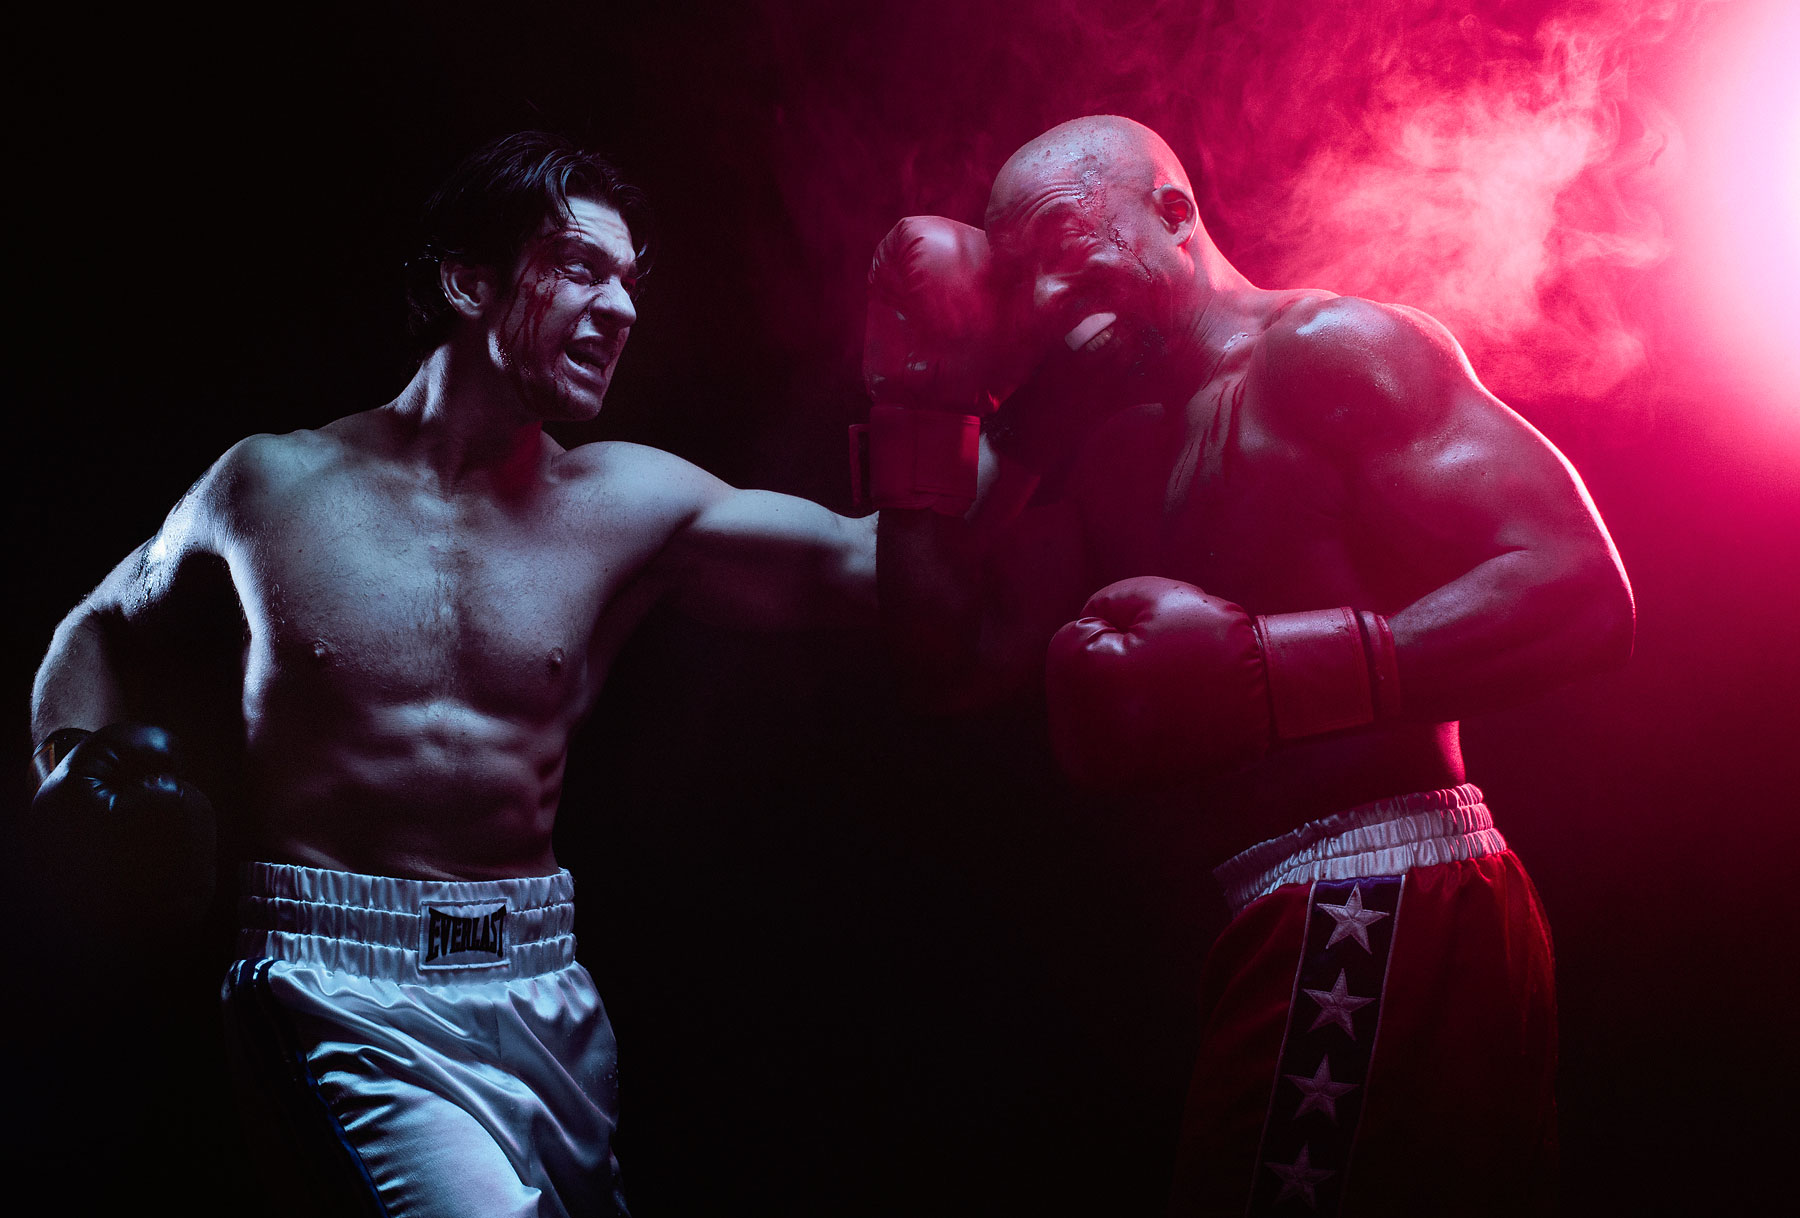 Andy Karl as Rocky Balboa and Terence Archie as Apollo Creed in ROCKY on Broadway. (Timothy Saccenti for TIME)